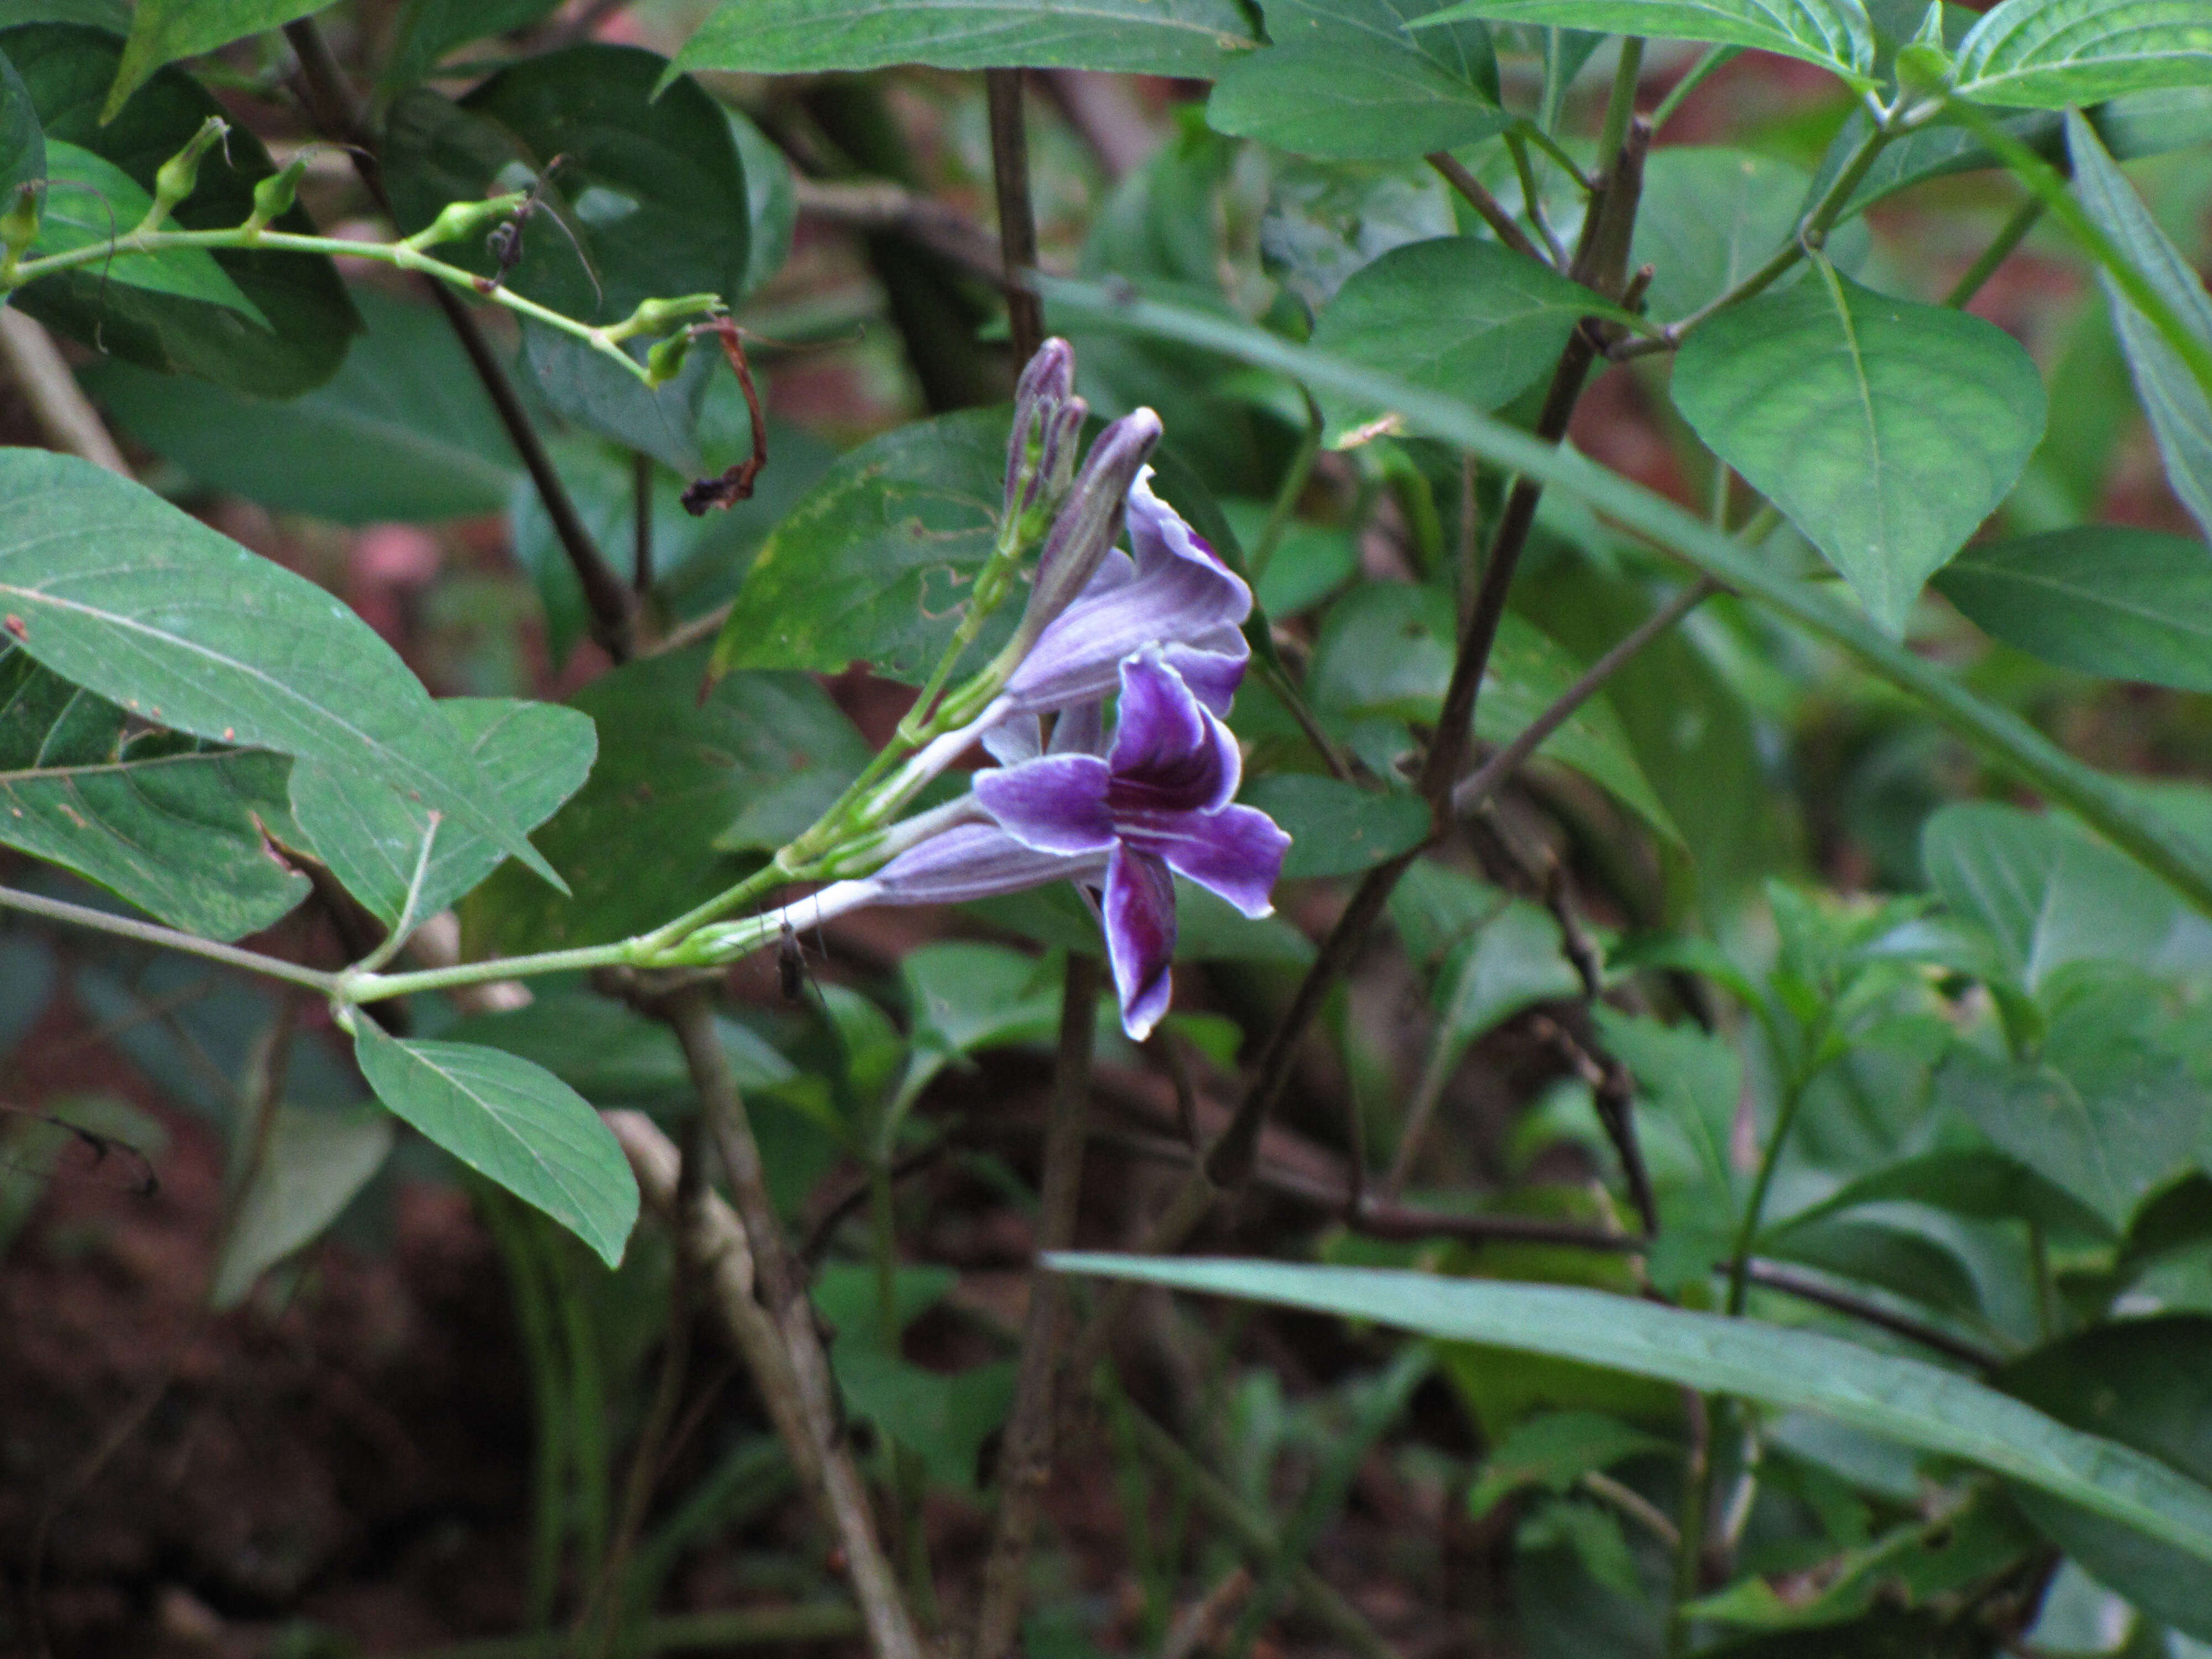 Image of Chinese violet